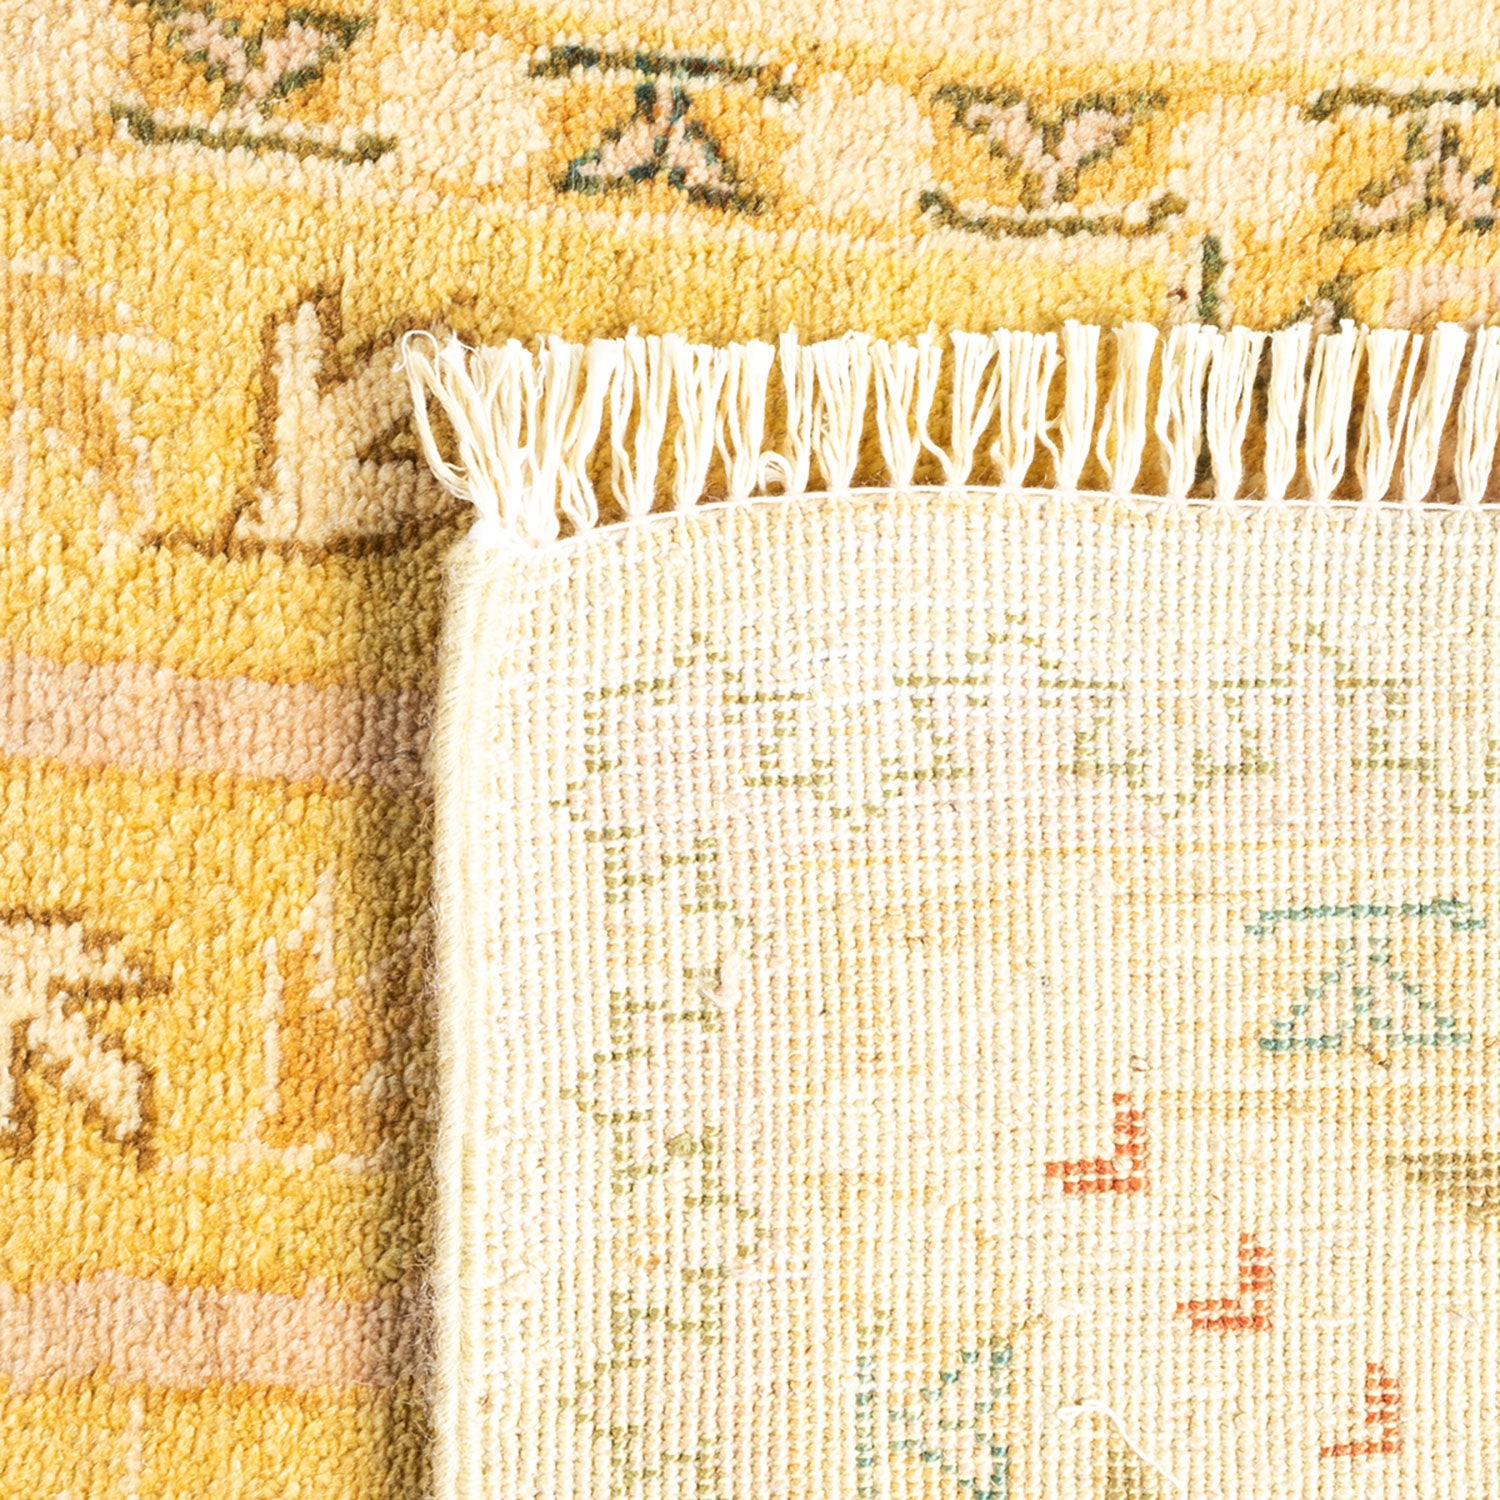 Close-up view of a woven rug with plush texture and pattern in warm yellow and green colors, transitioning to a coarser beige underside with faint traces of pattern.